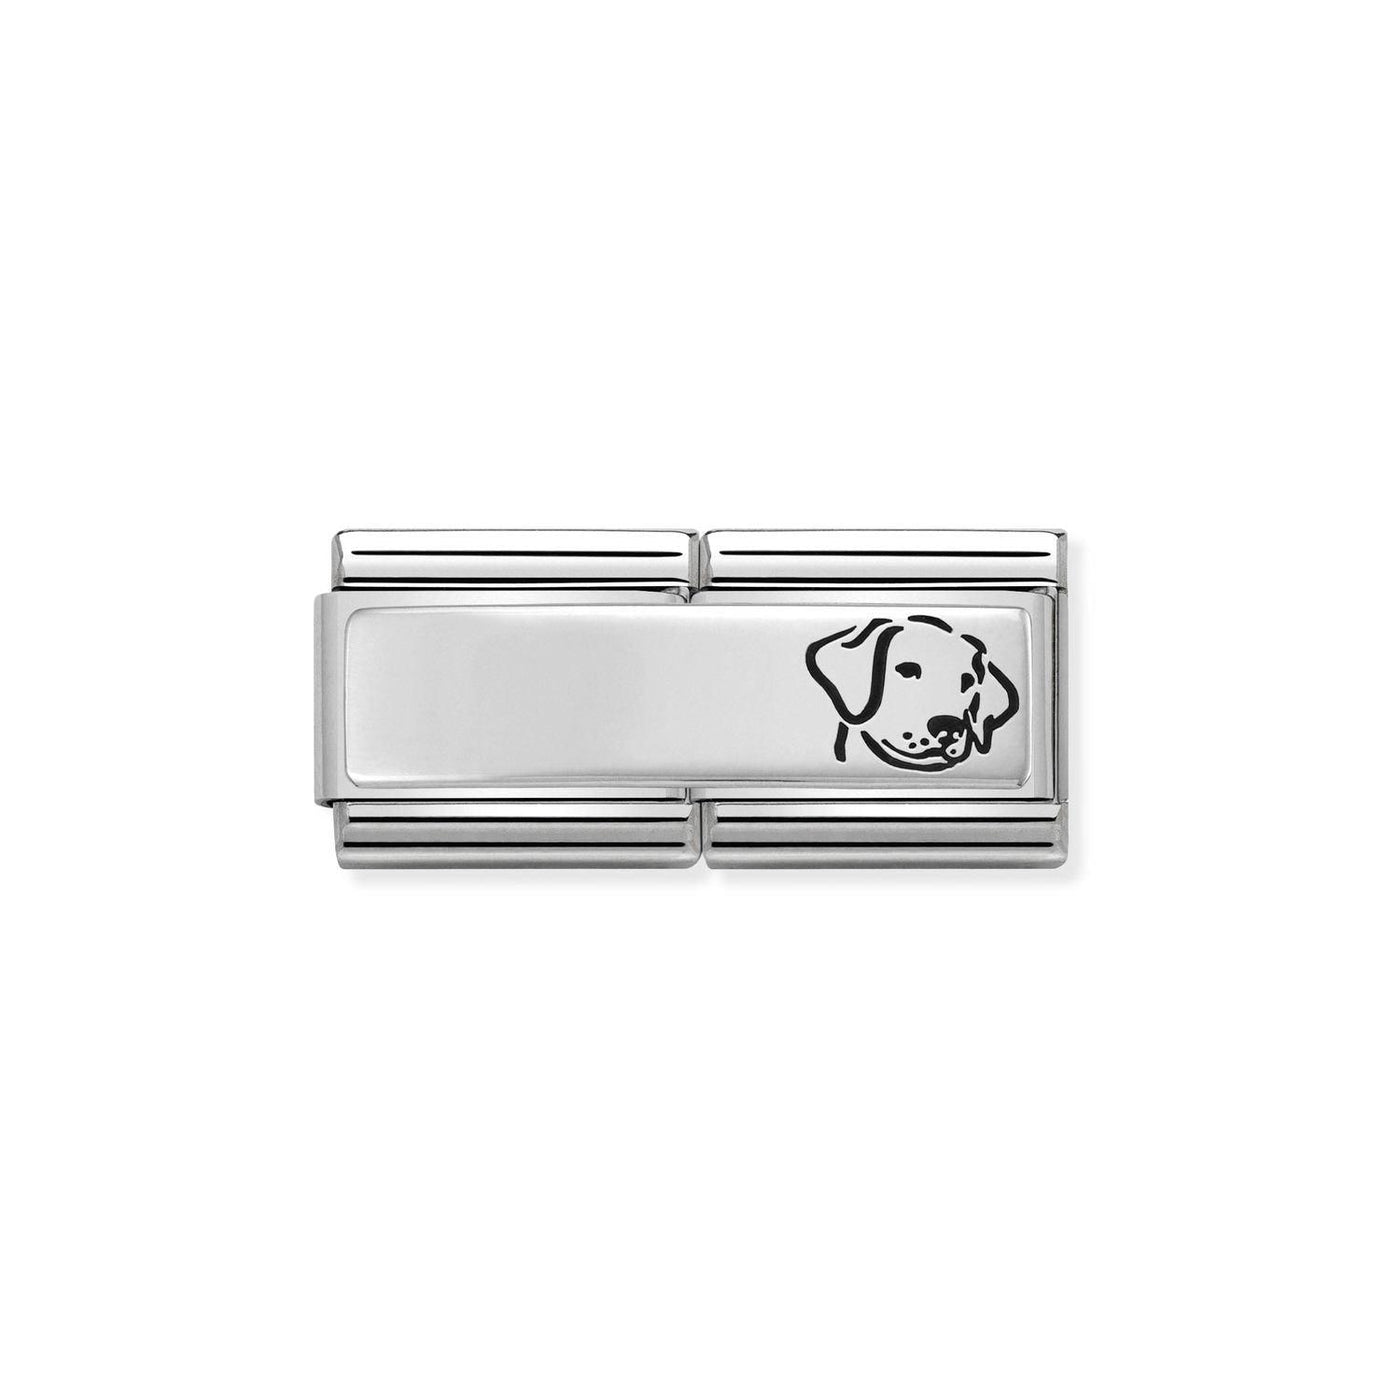 Nomination Classic Silver Plate with Dog Double Charm - Rococo Jewellery